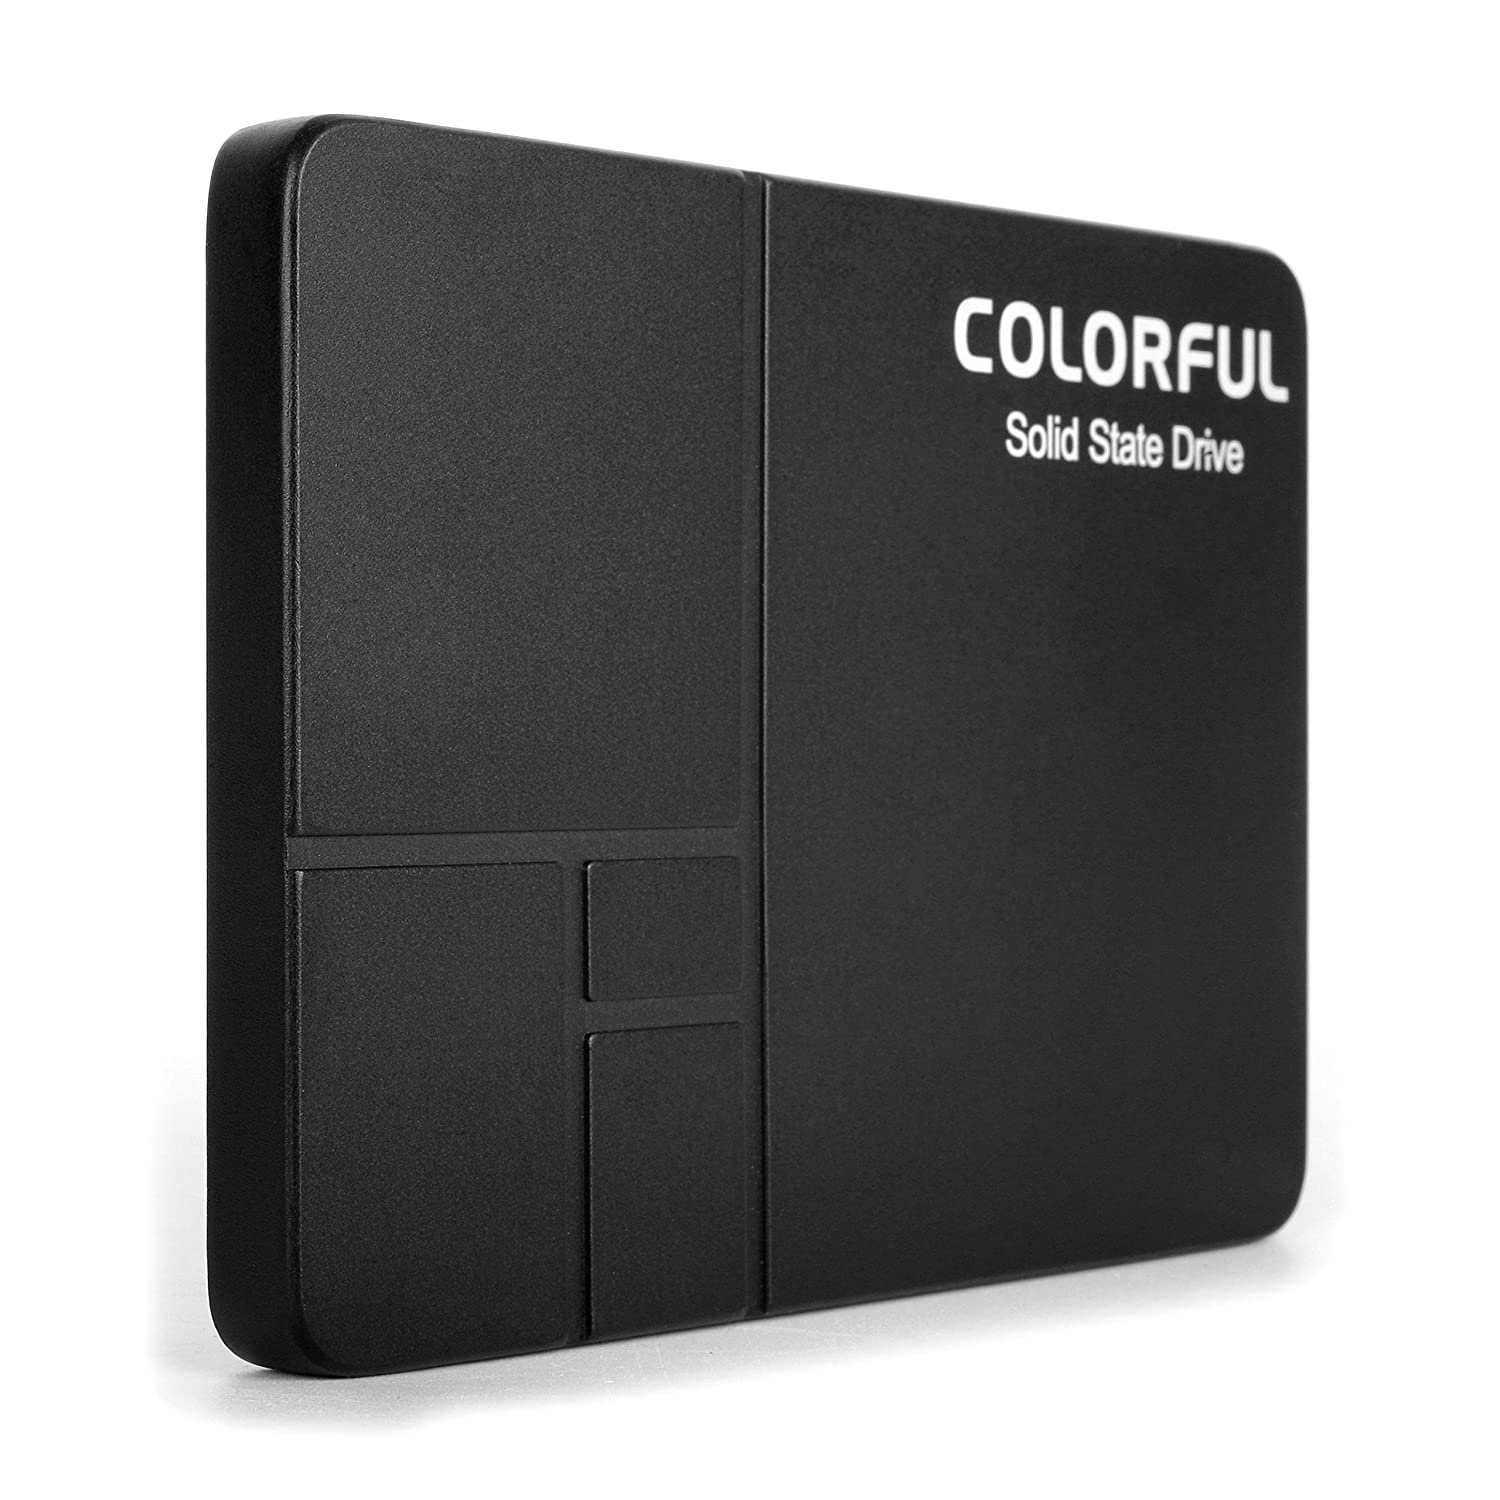 Colorful SSD 250GB Plus Series- SATA 3 Solid State Drive